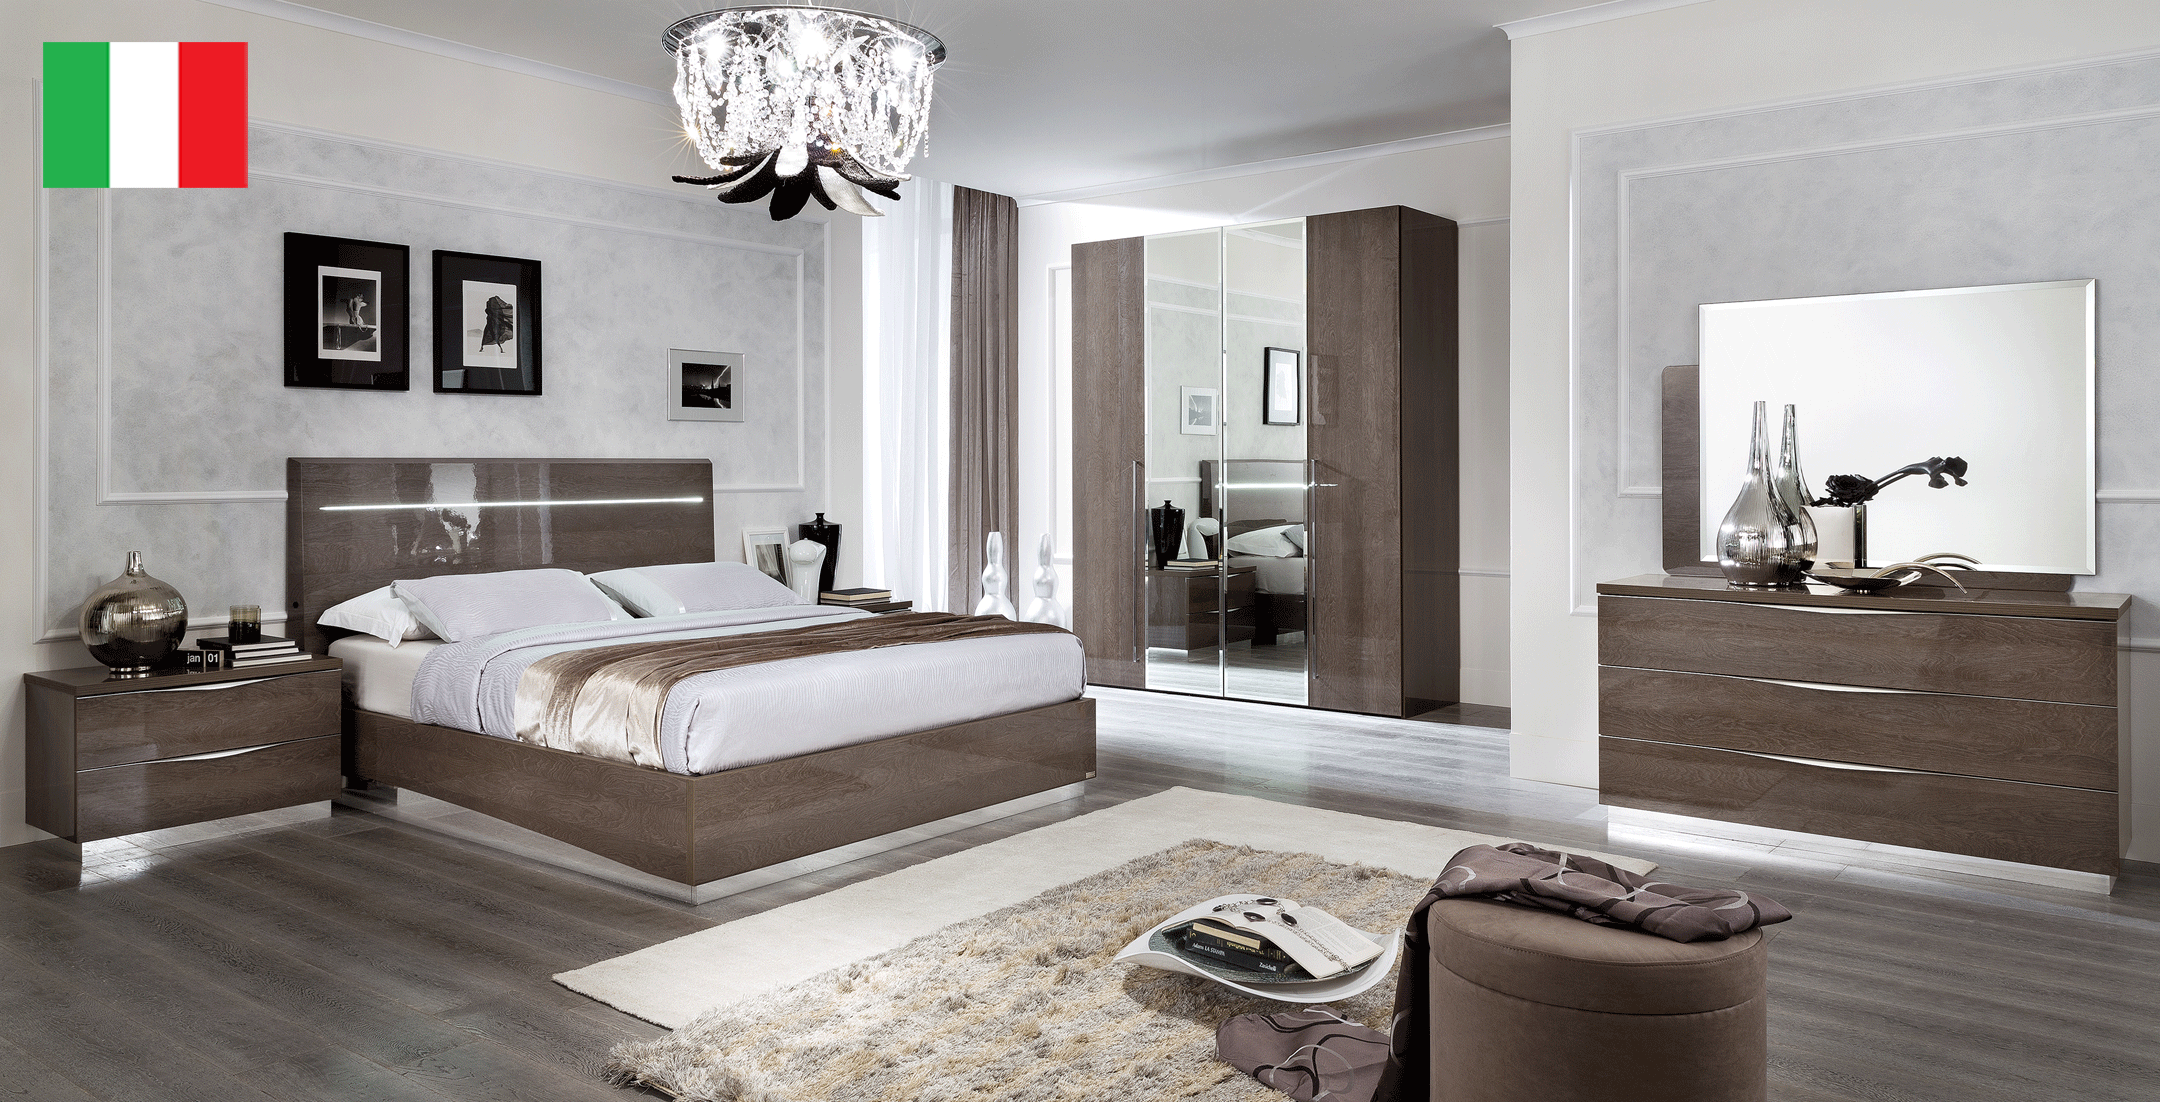 Bedroom Furniture Dressers and Chests Platinum LEGNO Bedroom SILVER BIRCH